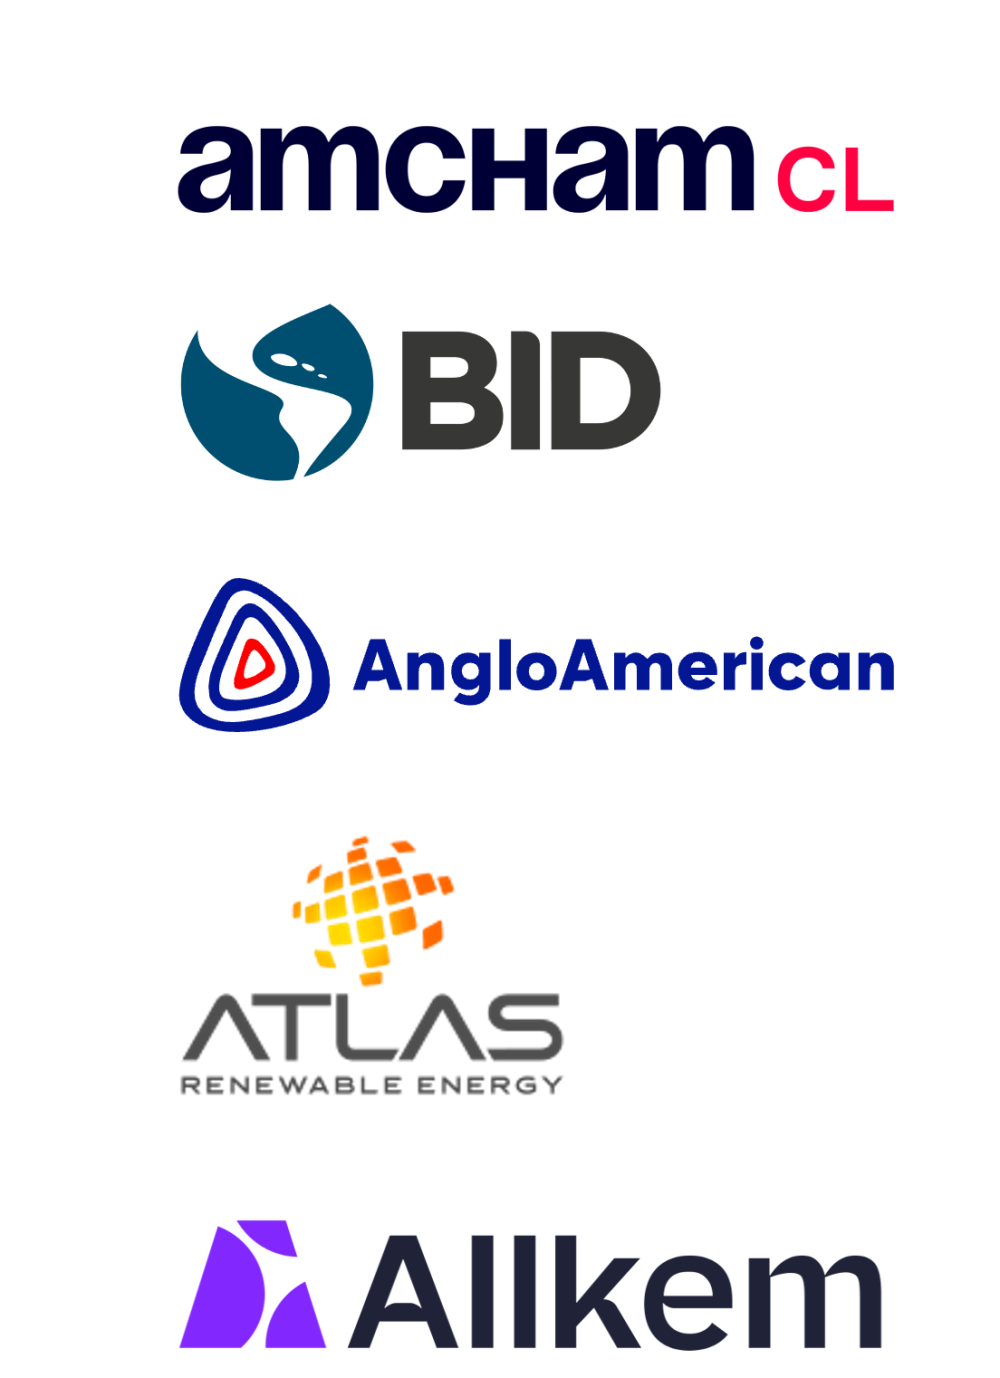 Chilean American Chamber of Commerce, Inter-American Development Bank, Anglo American, Atlas Renewable Energy, and Allkem